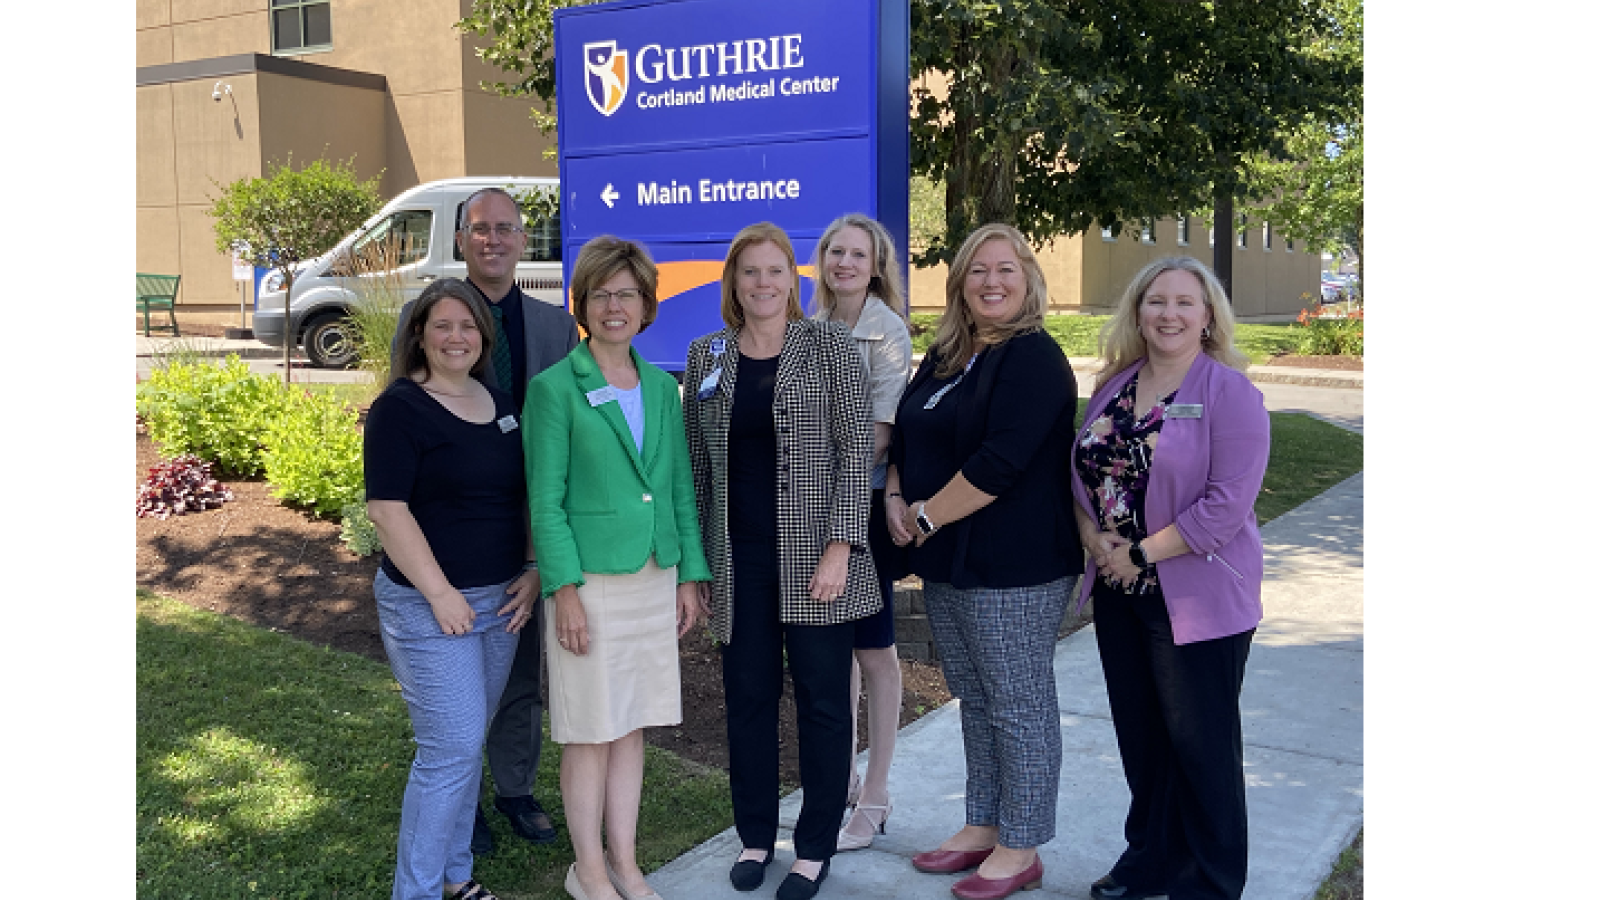 Guthrie and Tompkins Cortland Community College Partner to Combat National Shortage